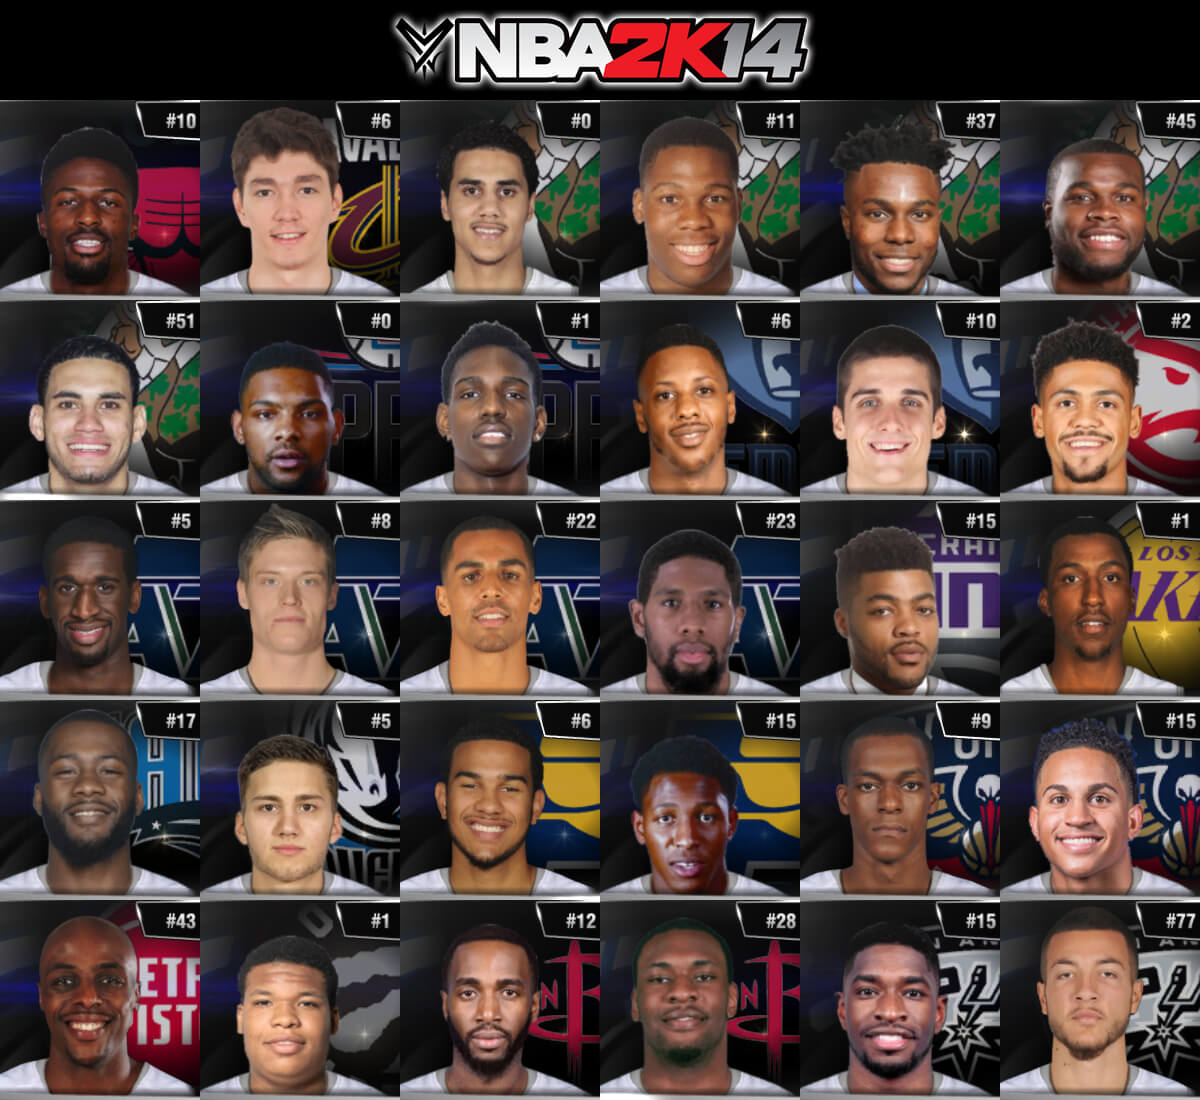 Nba 2k14 rosters